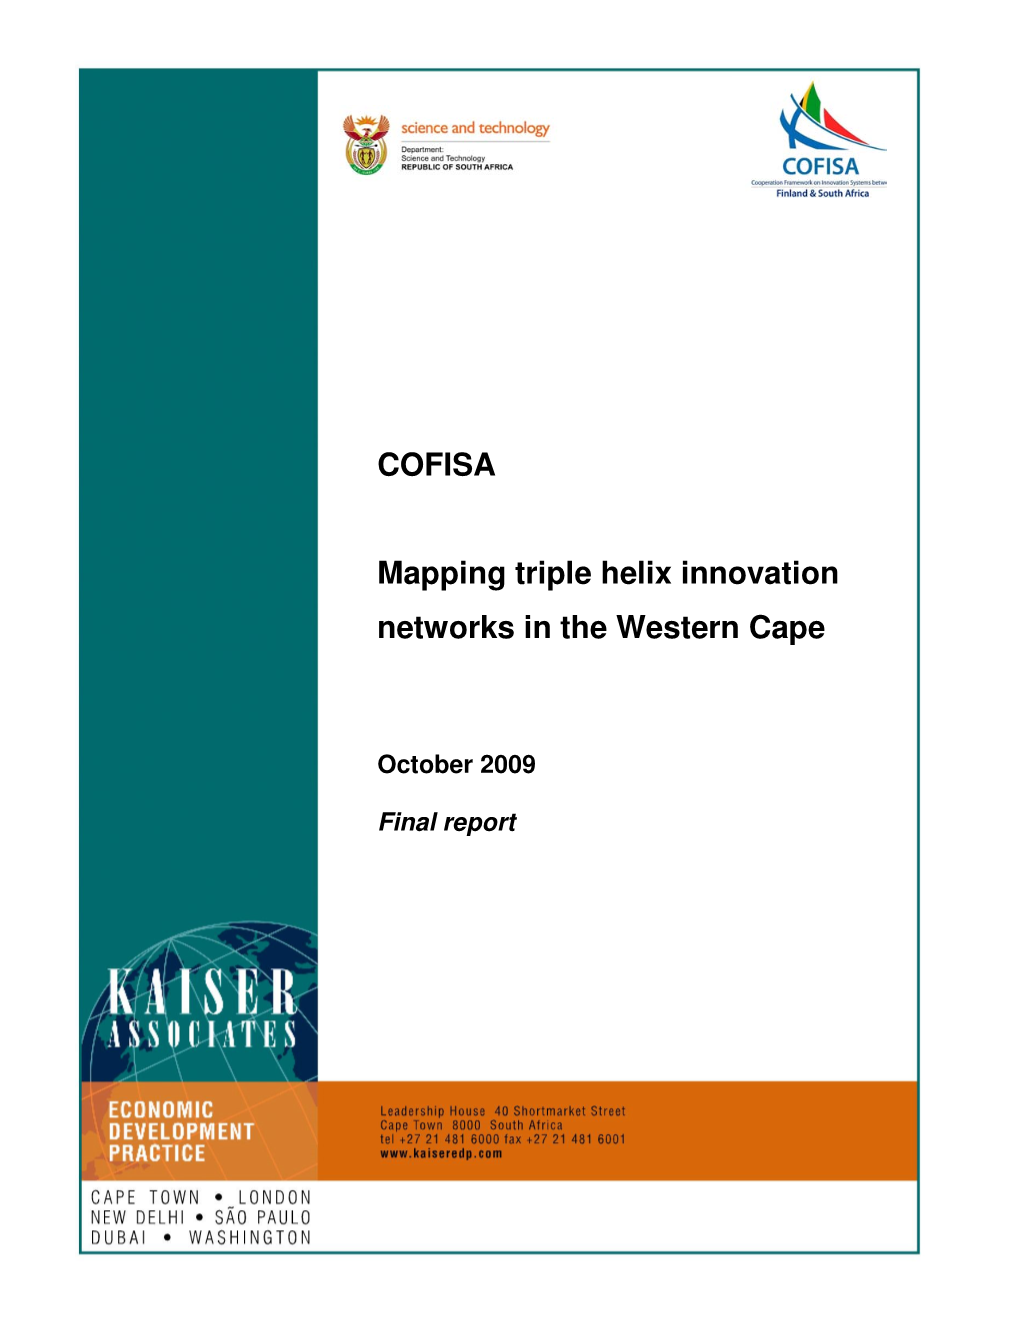 COFISA Mapping Triple Helix Innovation Networks in the Western